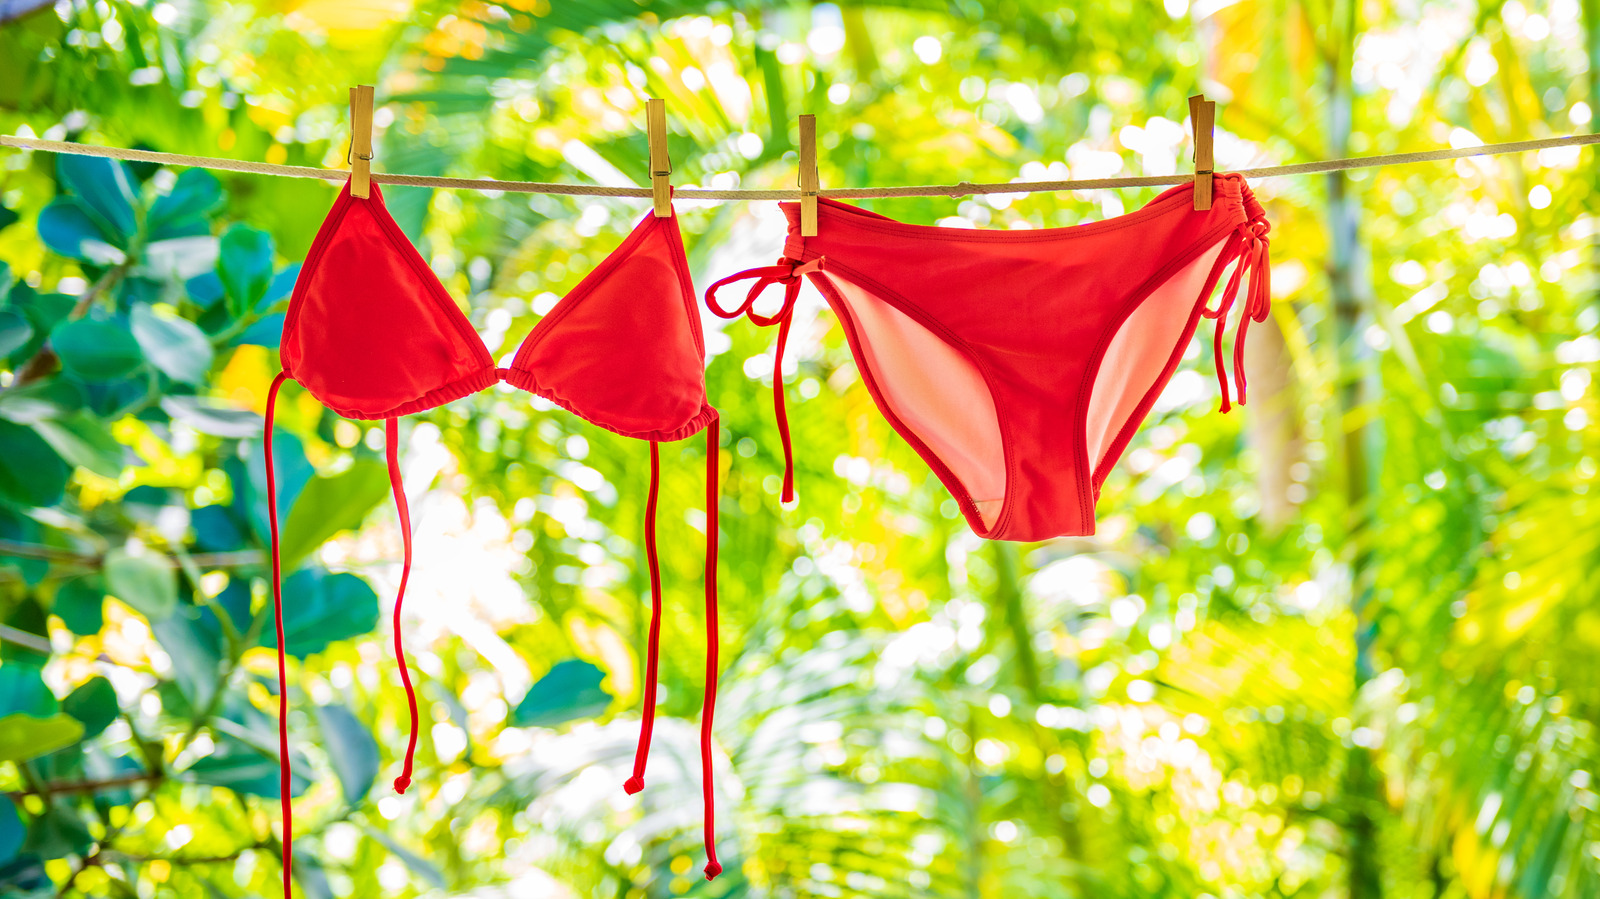 Here's How To Wash A Swimsuit The Right Way